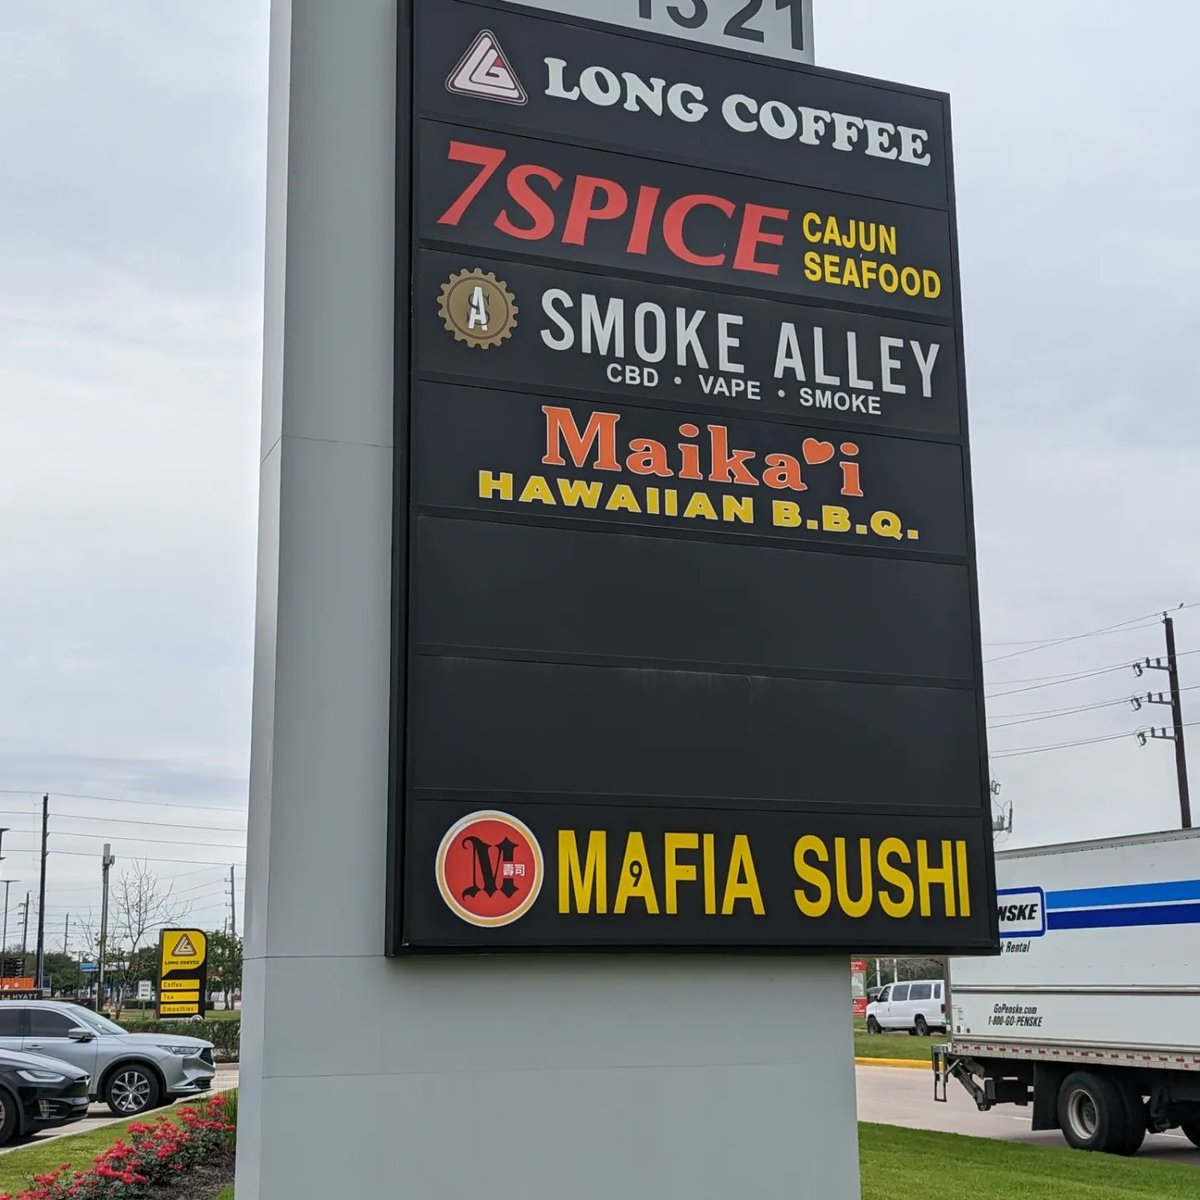 Pleased to announce the opening of our client @7SpiceCajun in Katy on I-10 and Westgreen Blvd.

This is their 15th location around town, with plans to open 4-6 more stores this year.

See 👇 for site criteria